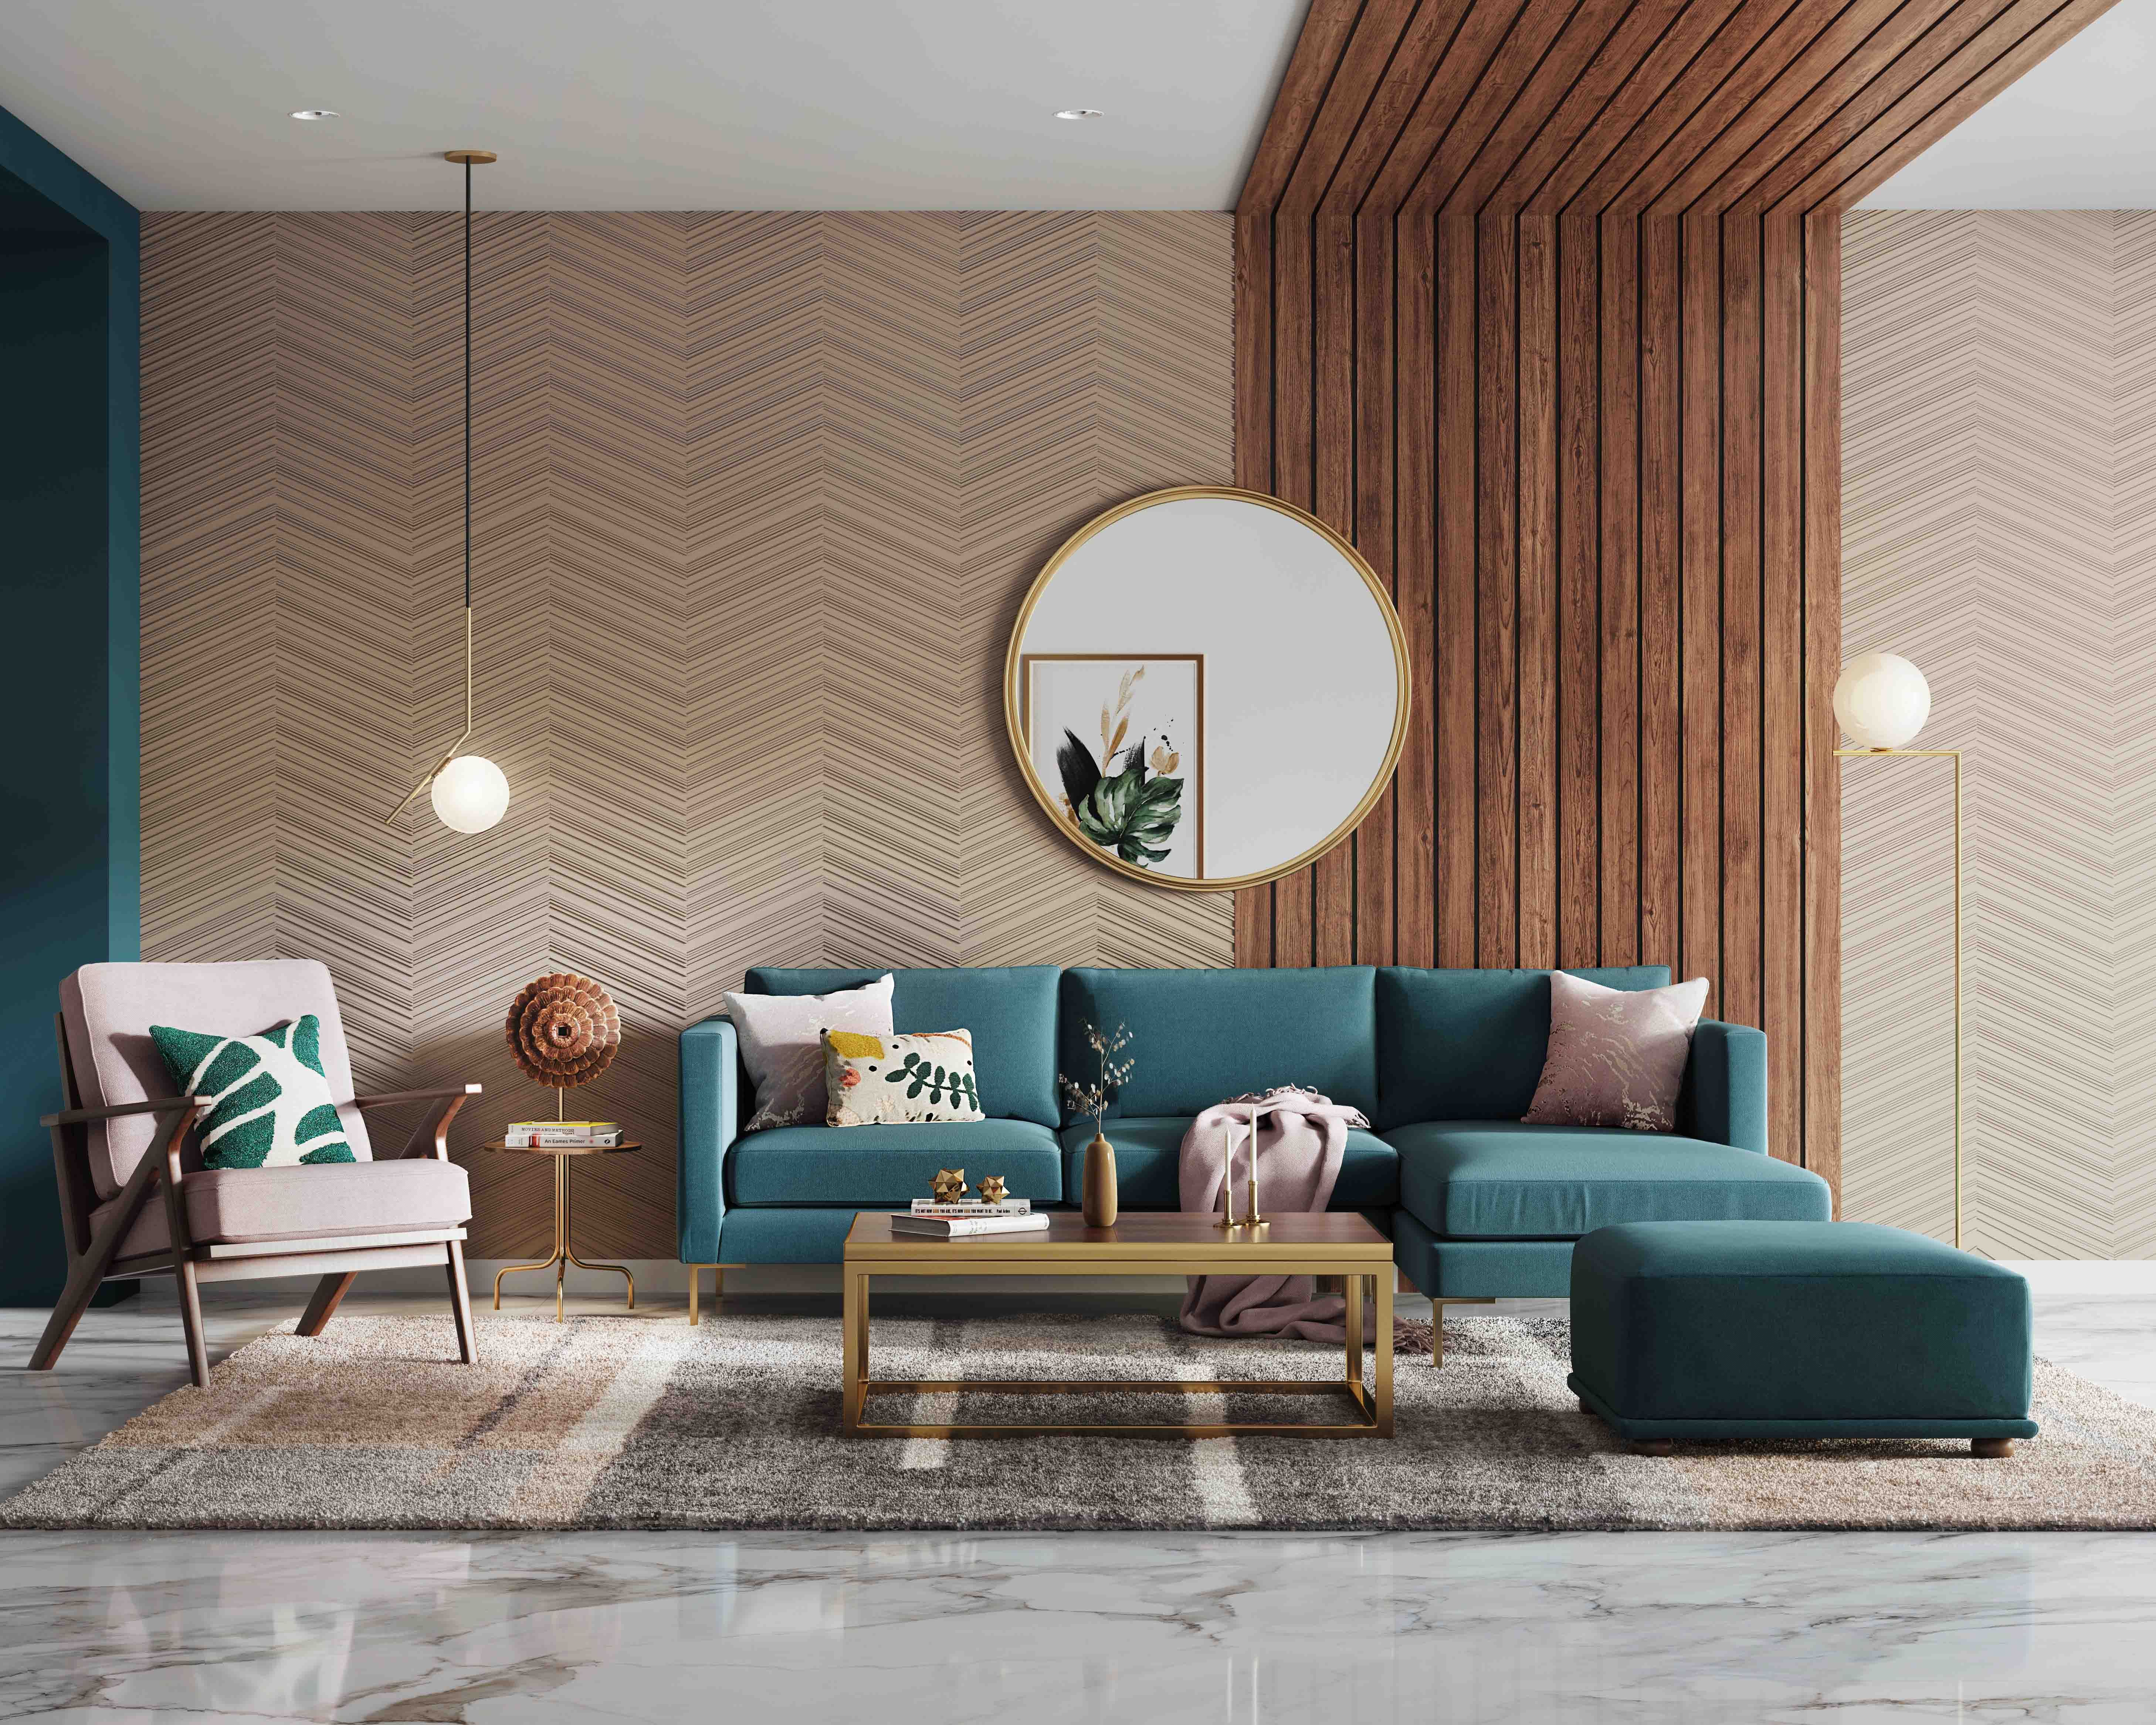 Contemporary Living Room Wall Design With Beige Chevron Wallpaper And Floor-To-Ceiling Wooden Panel